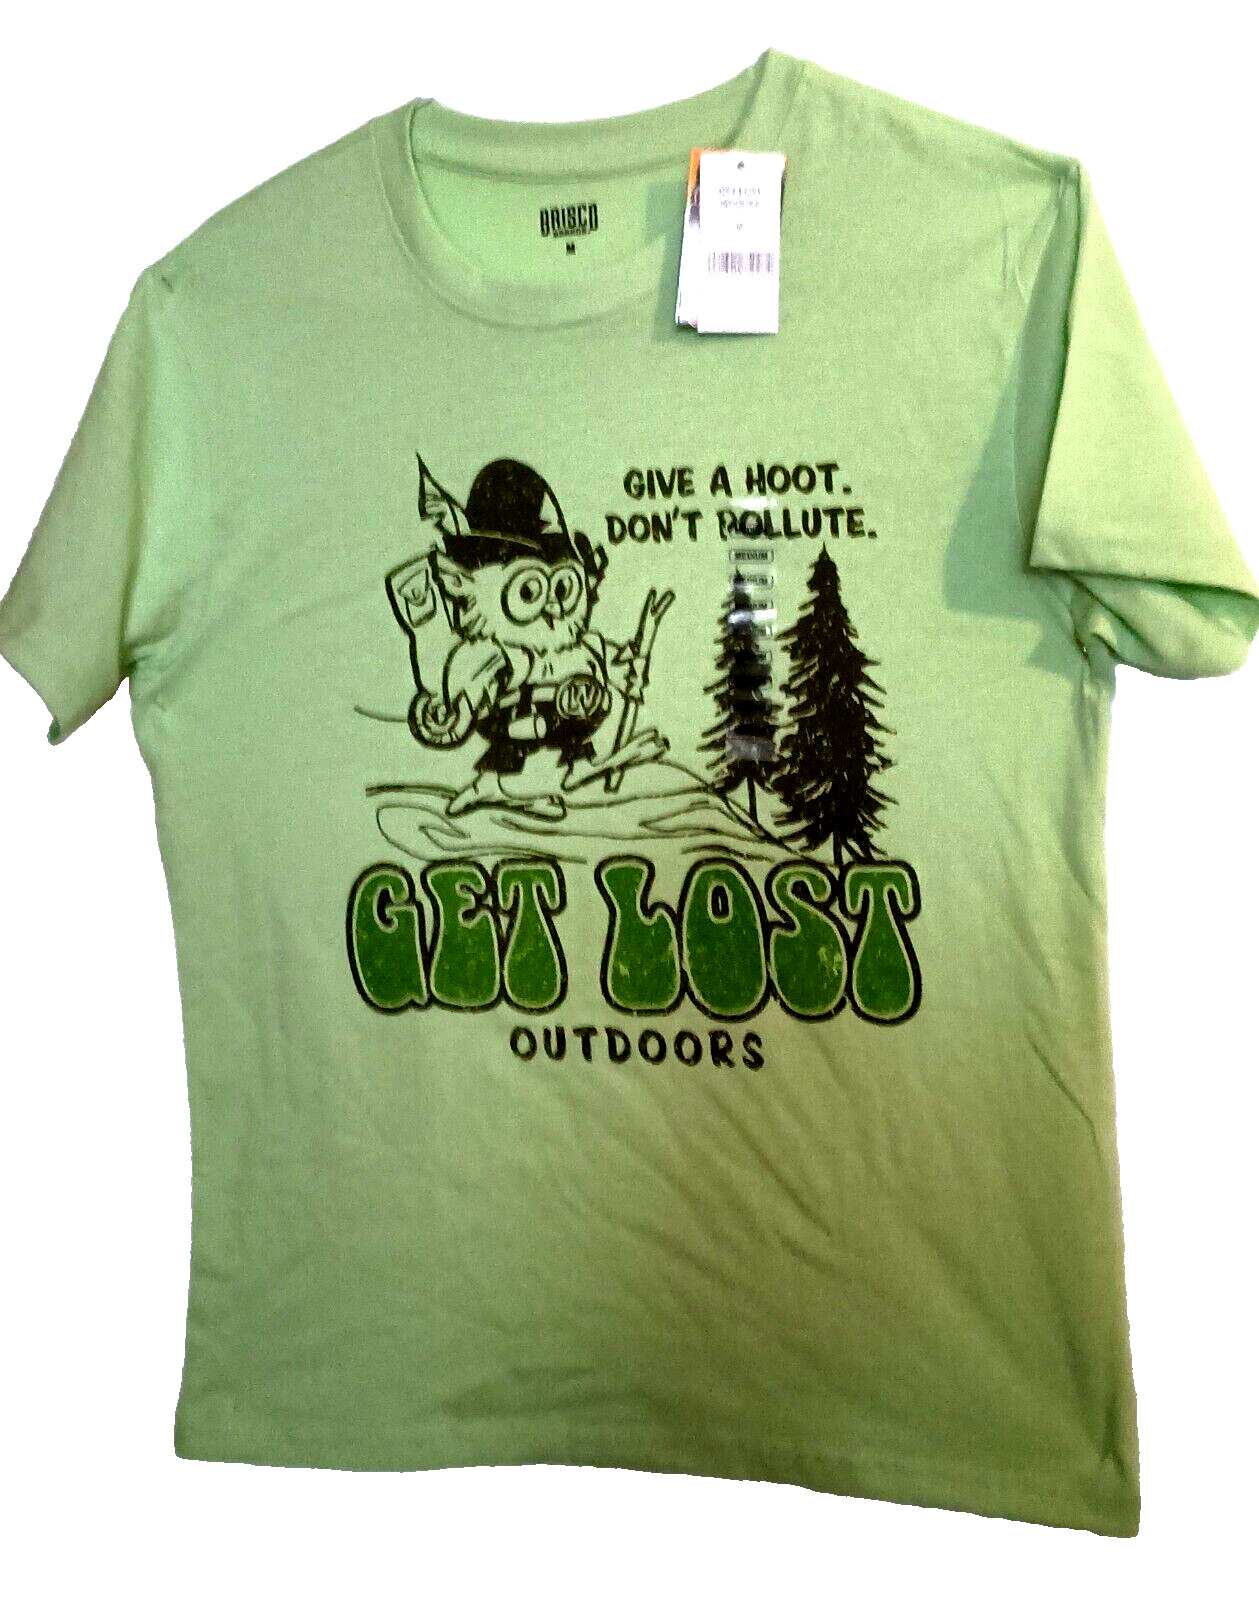 Woodsy The Owl Give A Hoot Don't Pollute Get Lost T-Shirt New NOS Size Med